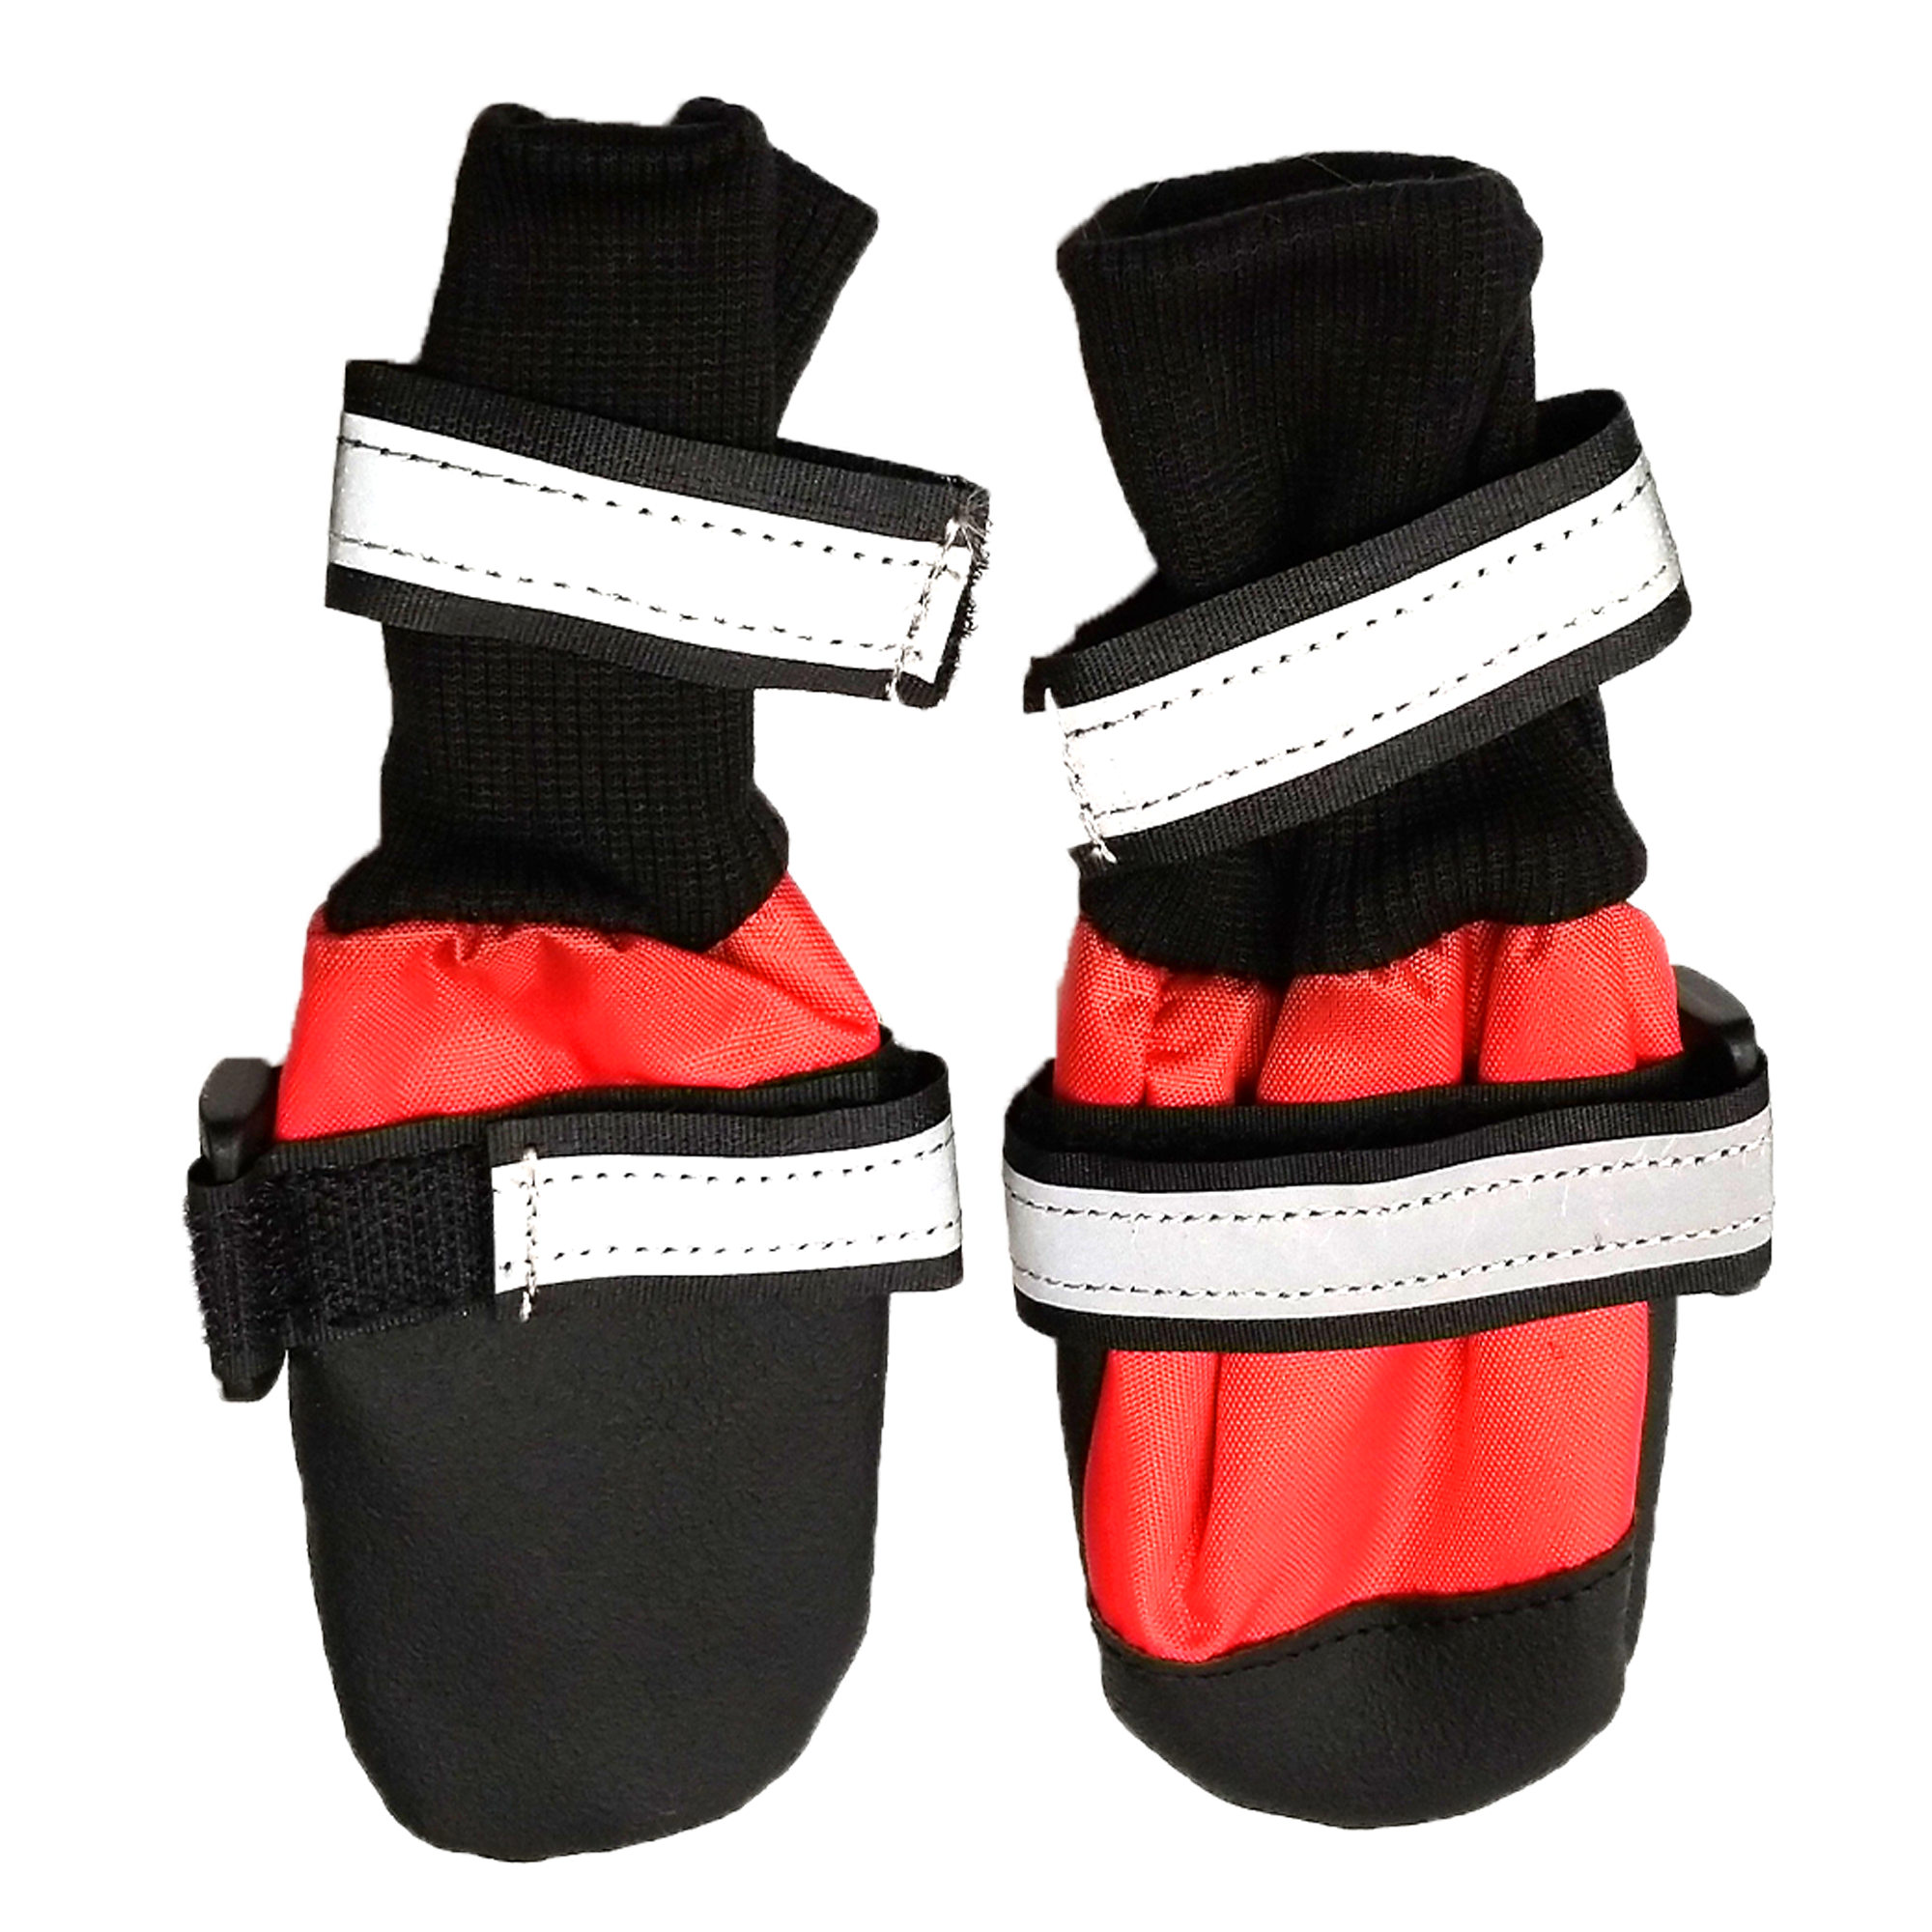 Lined Winter Dog Boots With Knitted Cuffs, Two Reflective Ties, Rubber Sole & Toe, Red/Black